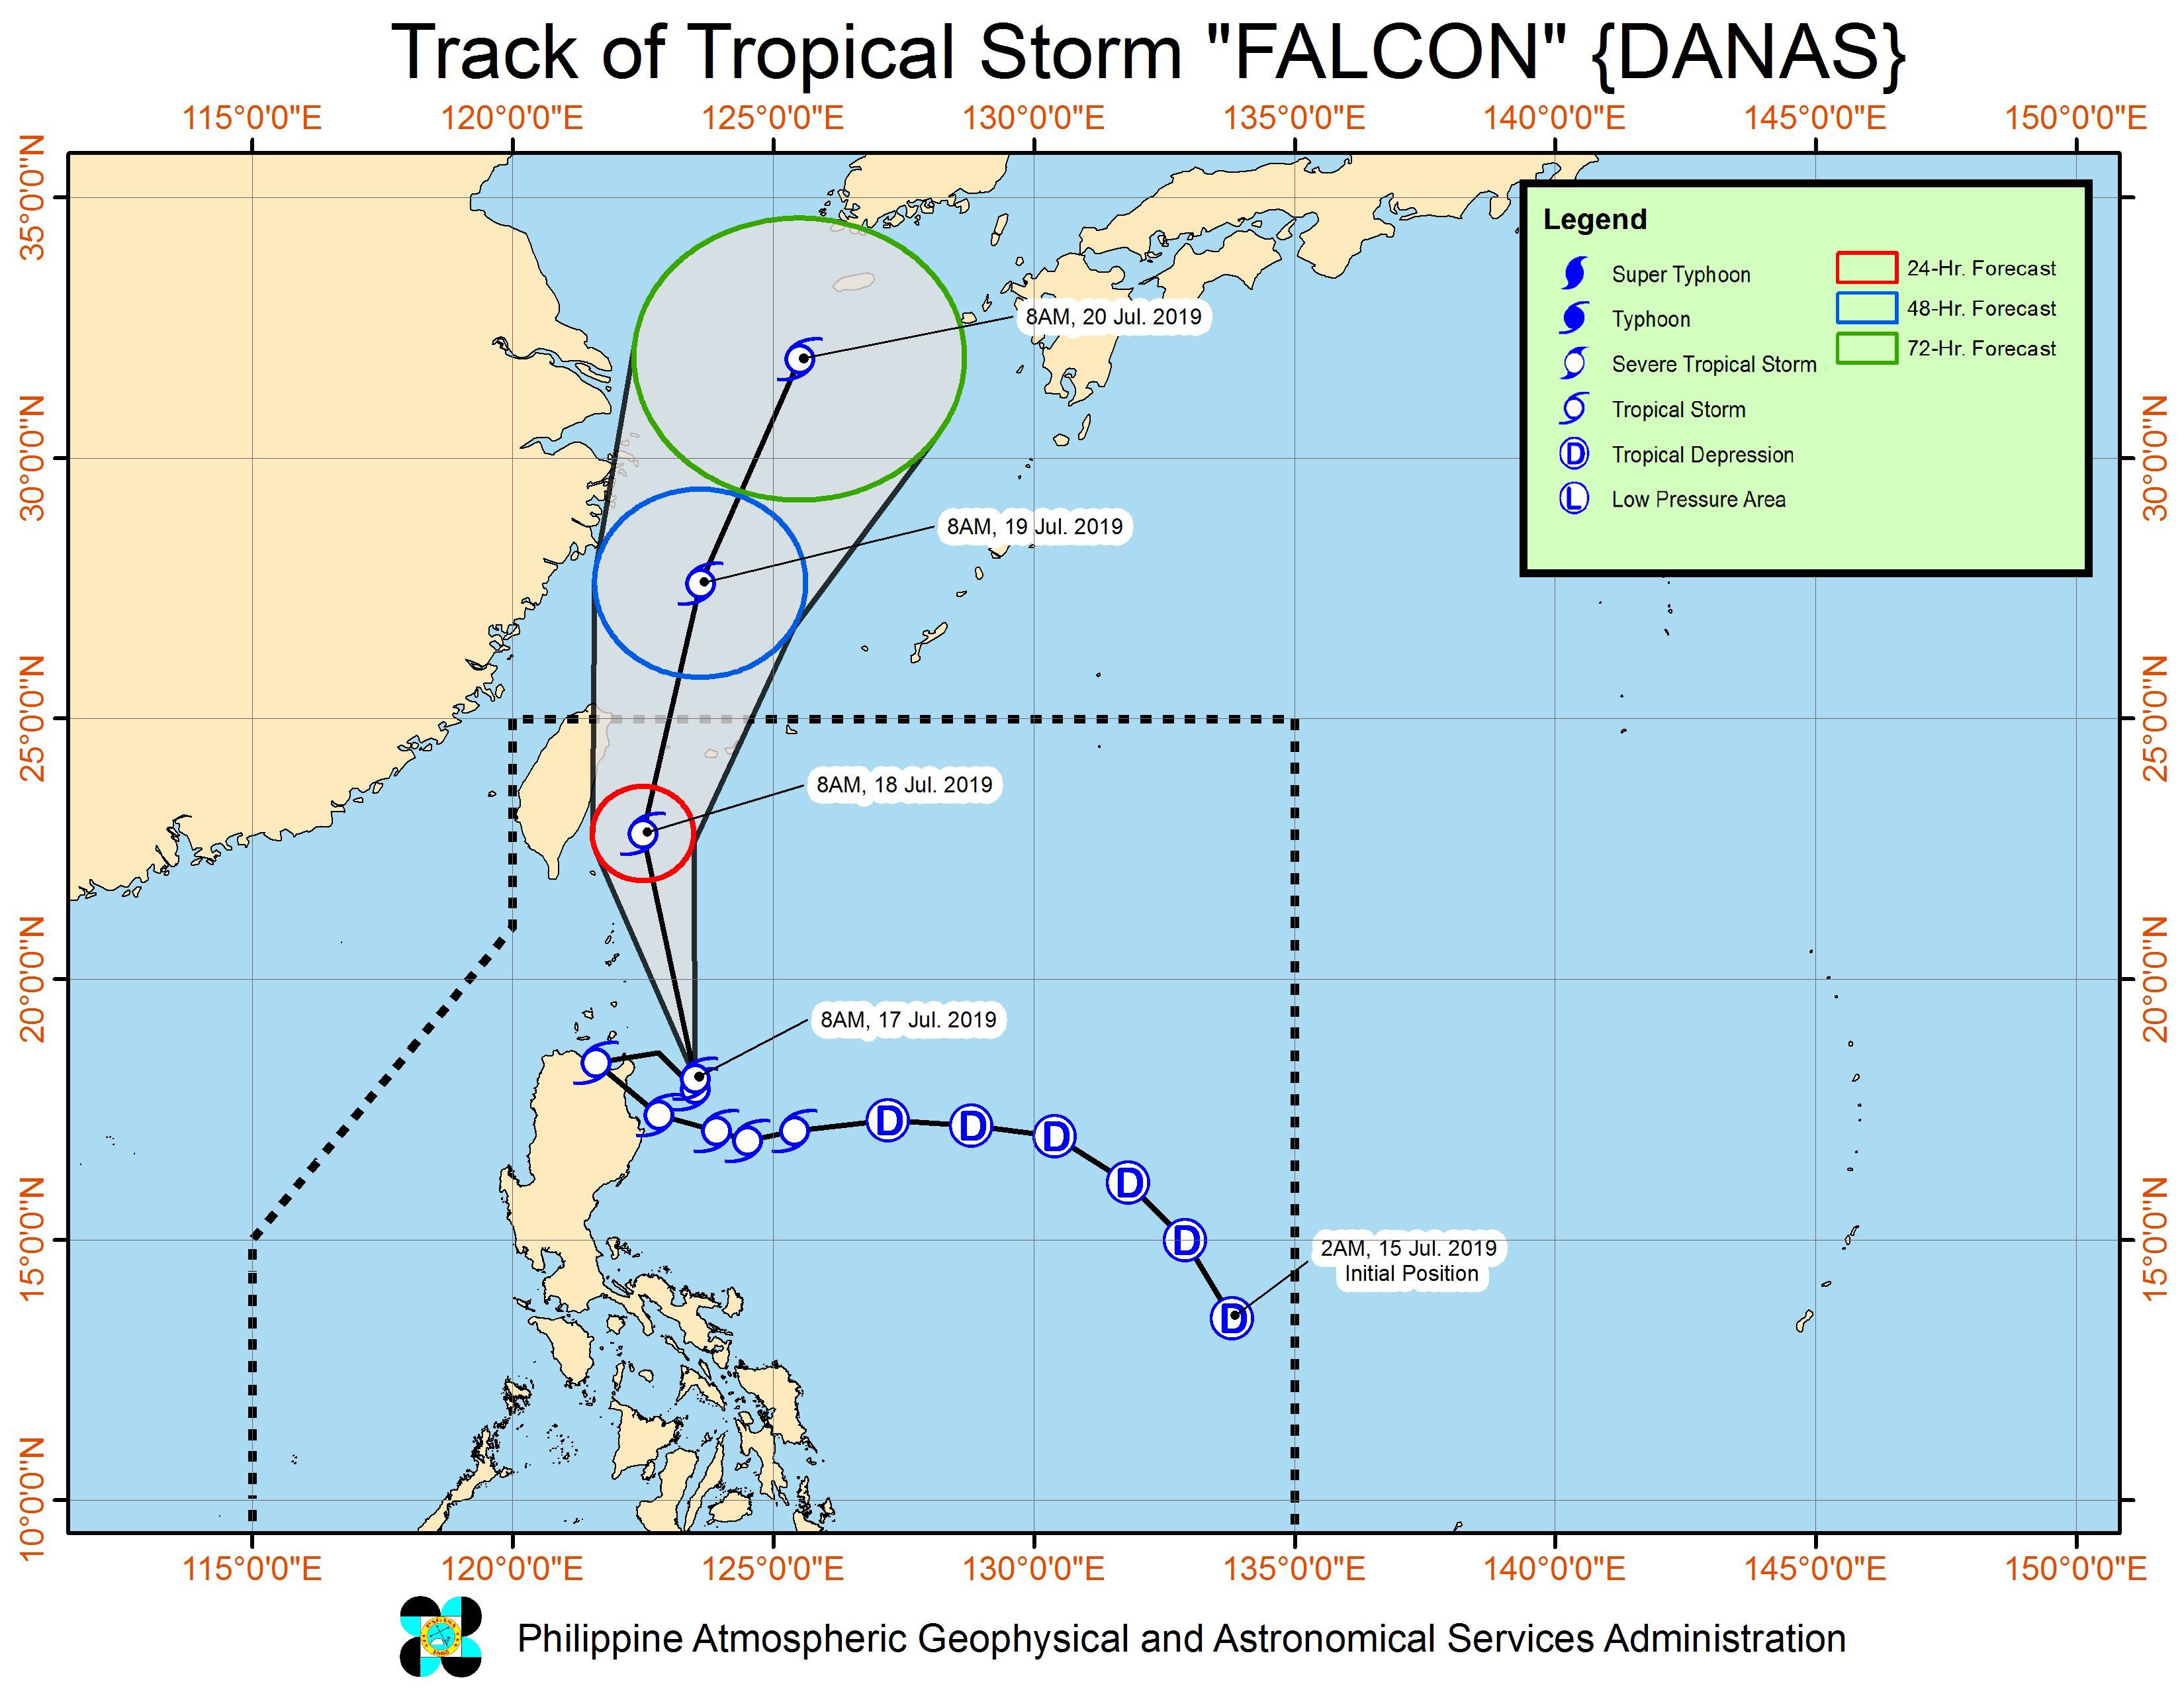 Forecast track of Tropical Storm Falcon (Danas) as of July 17, 2019, 11 am. Image from PAGASA 